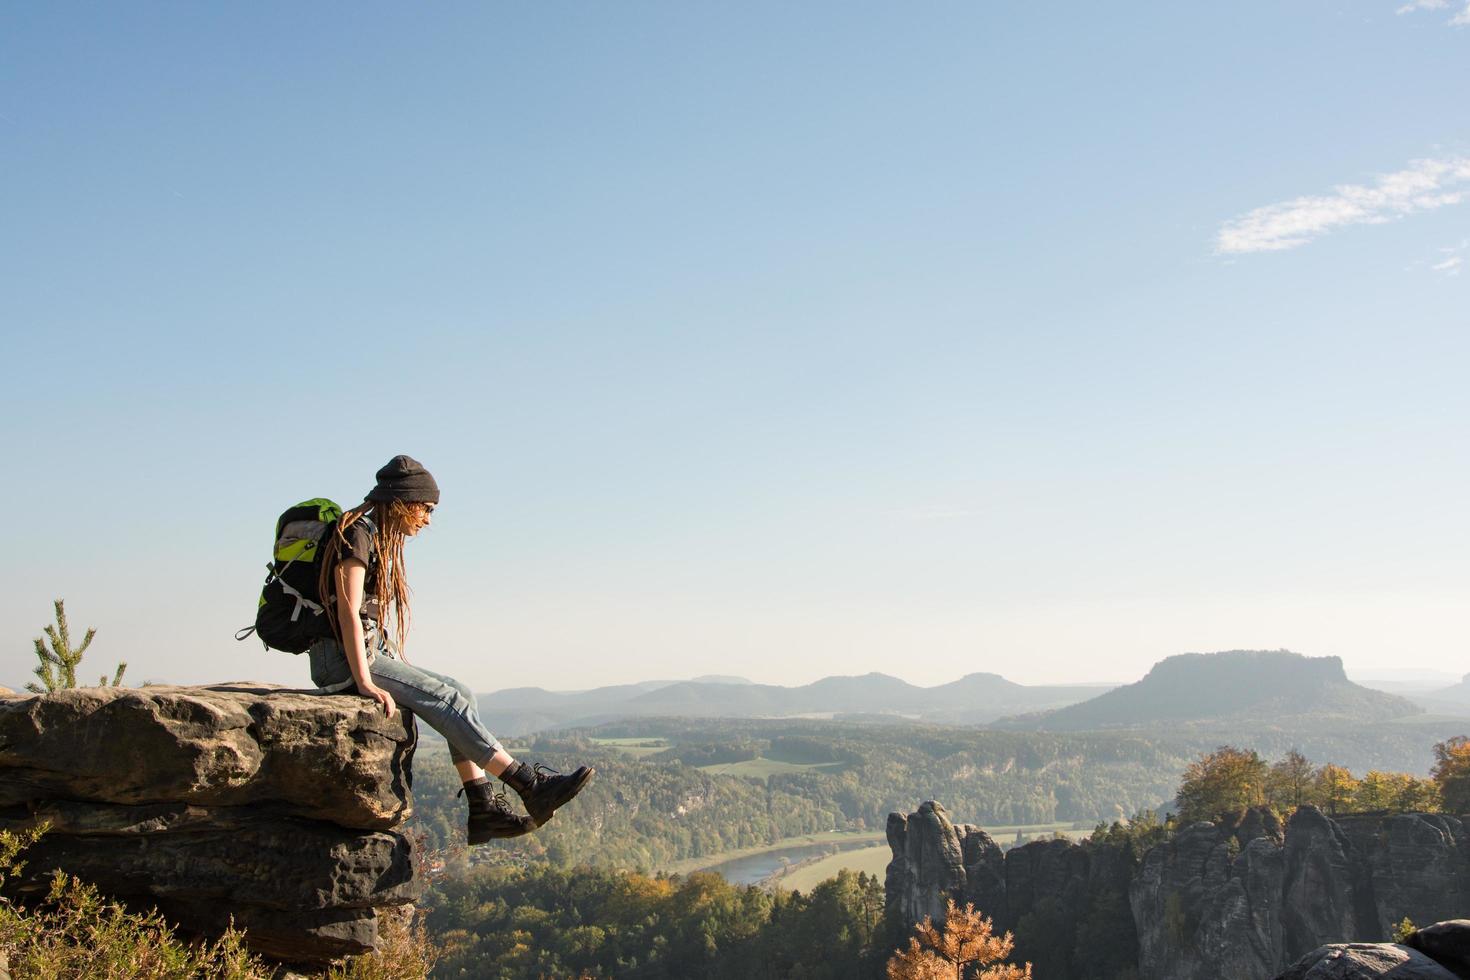 Youmg woman with backpack stand on the old german castle in saxon switzerland national park photo